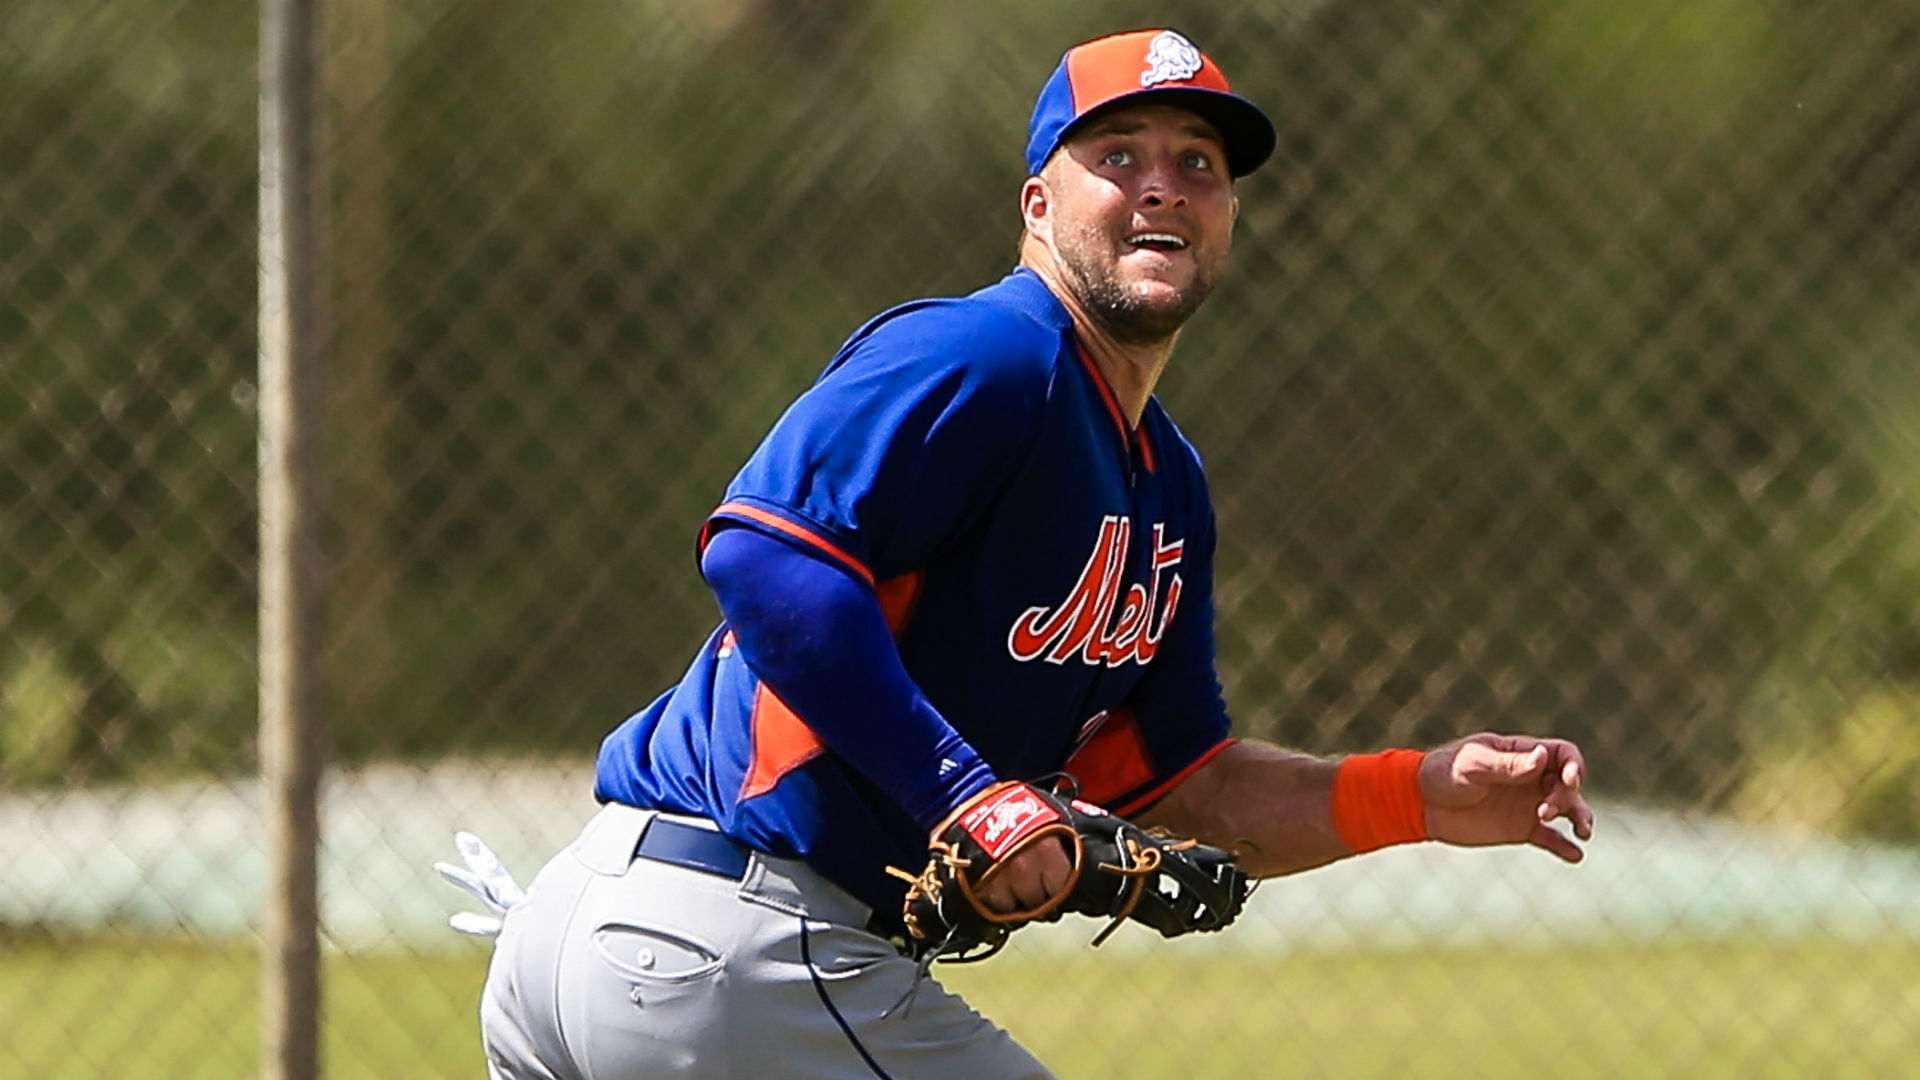 Former minor leaguer: Mets signing Tim Tebow 'sends a very mixed message' | MLB ...1920 x 1080